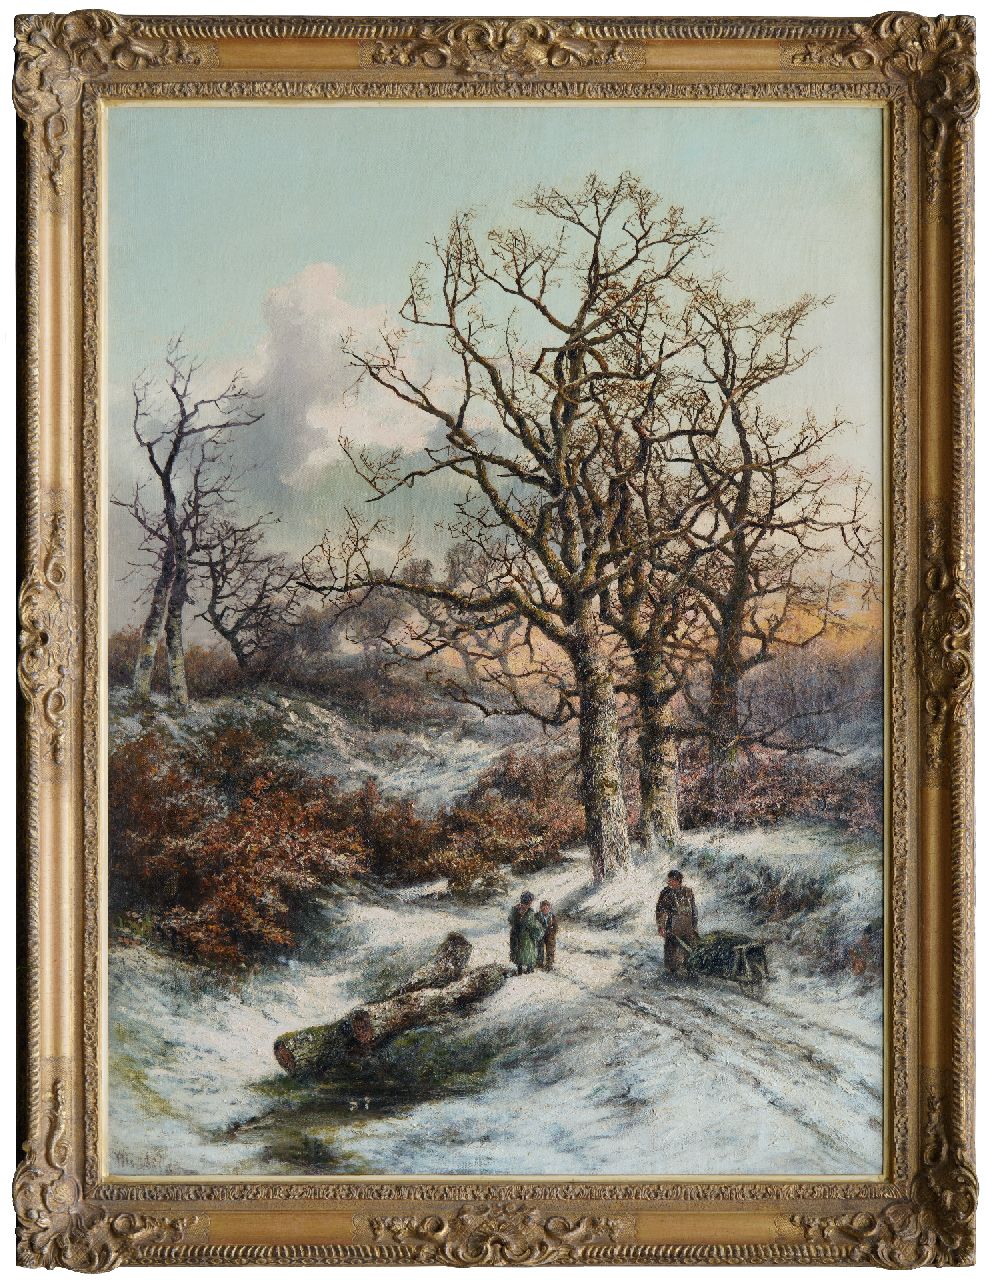 Middelbeek M.C.  | Marius Christiaan Middelbeek | Paintings offered for sale | A winter landscape, oil on canvas 129.9 x 95.3 cm, signed l.l.